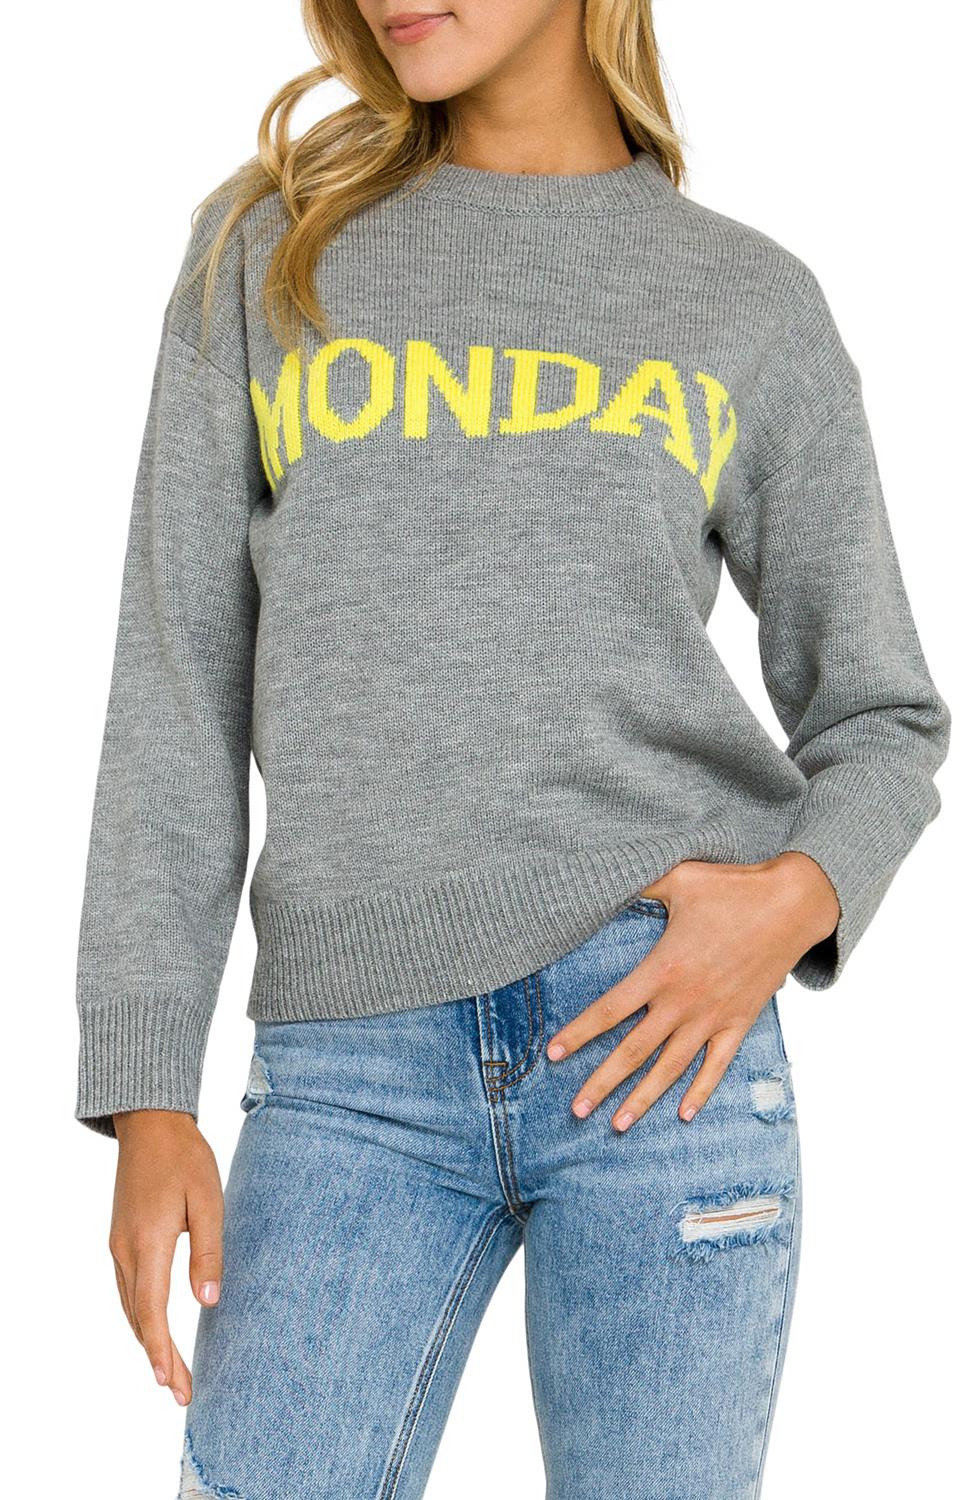 Monday Motif Grey Sweater with Yellow Lettering